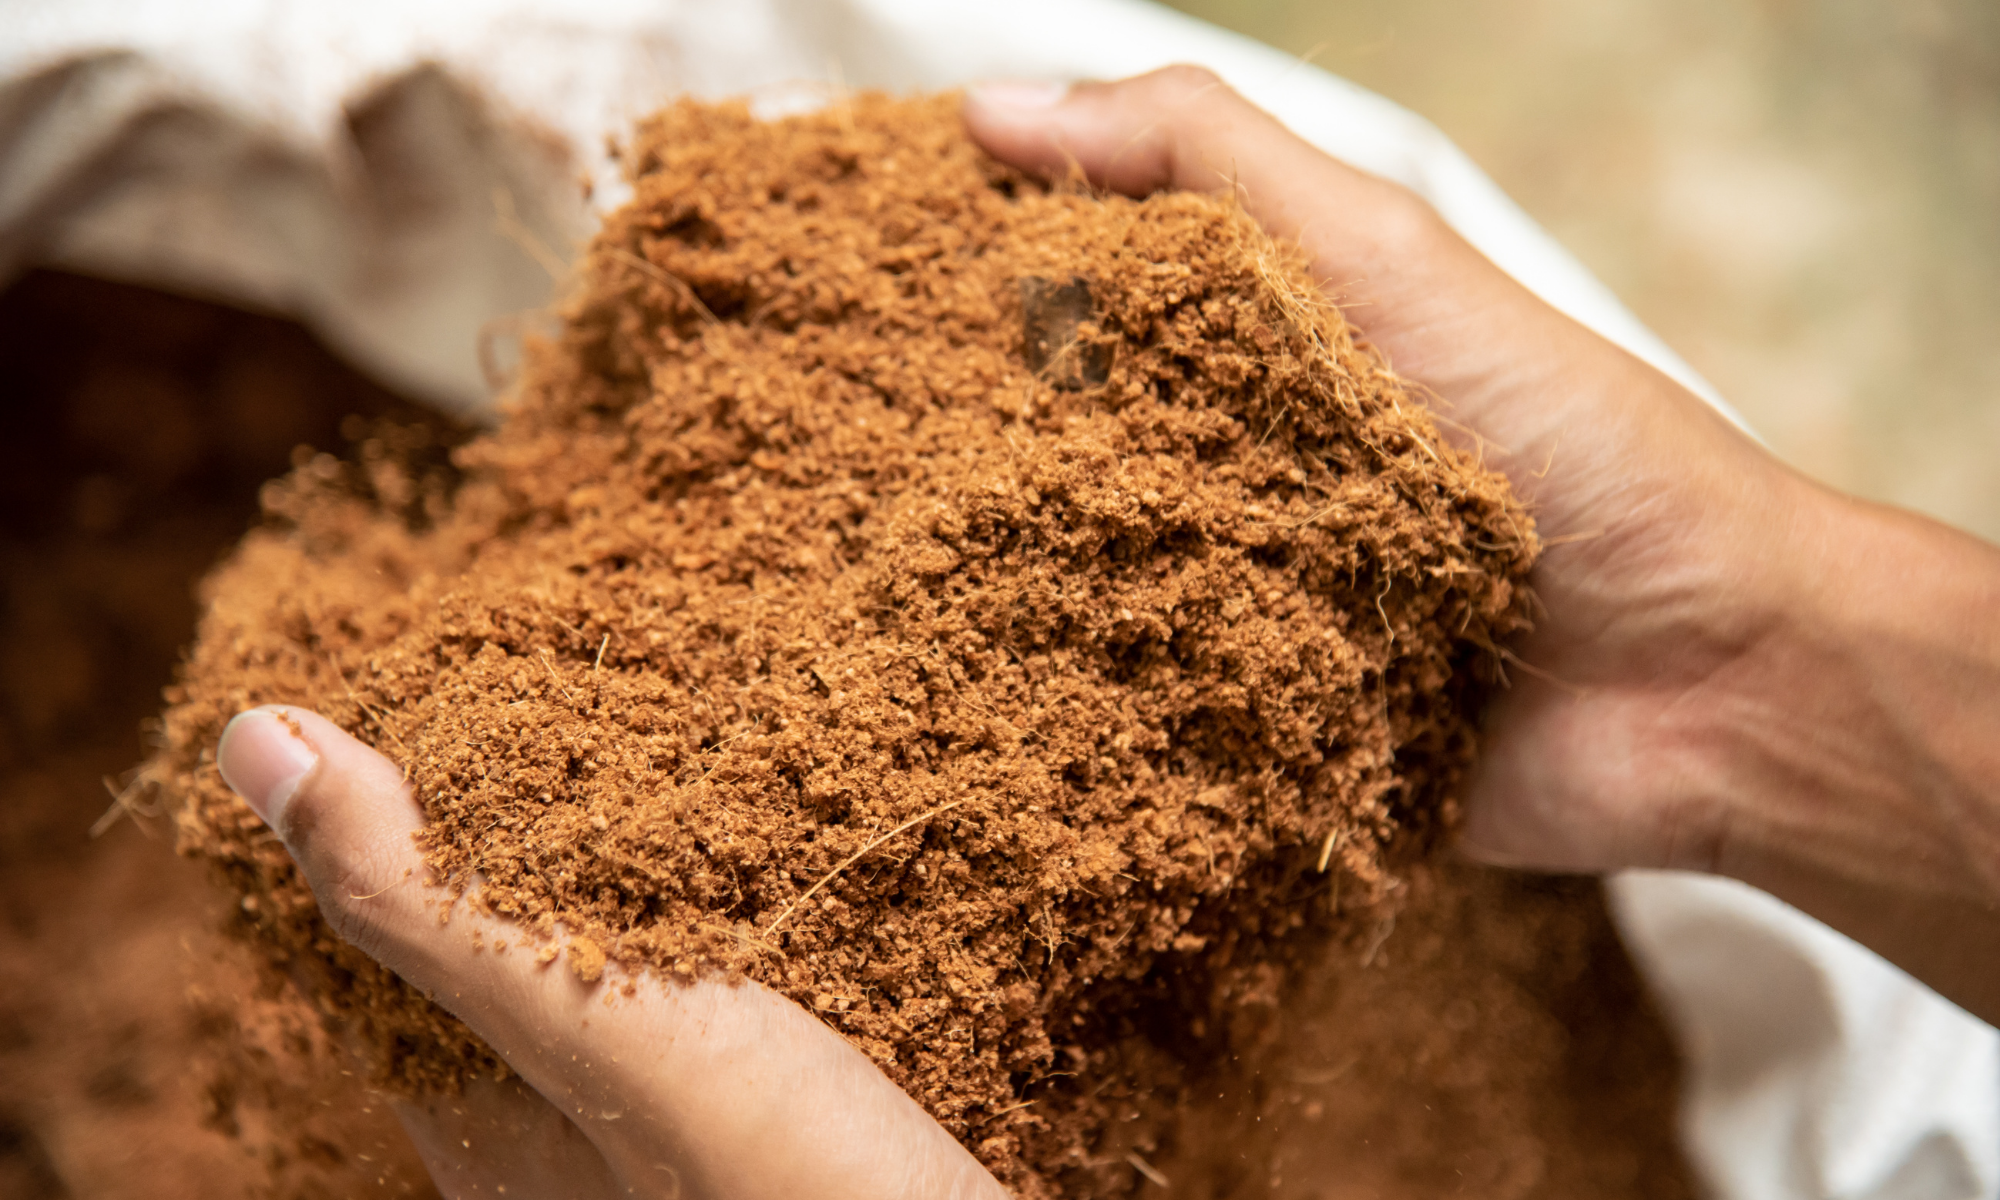 What is Coco Peat?